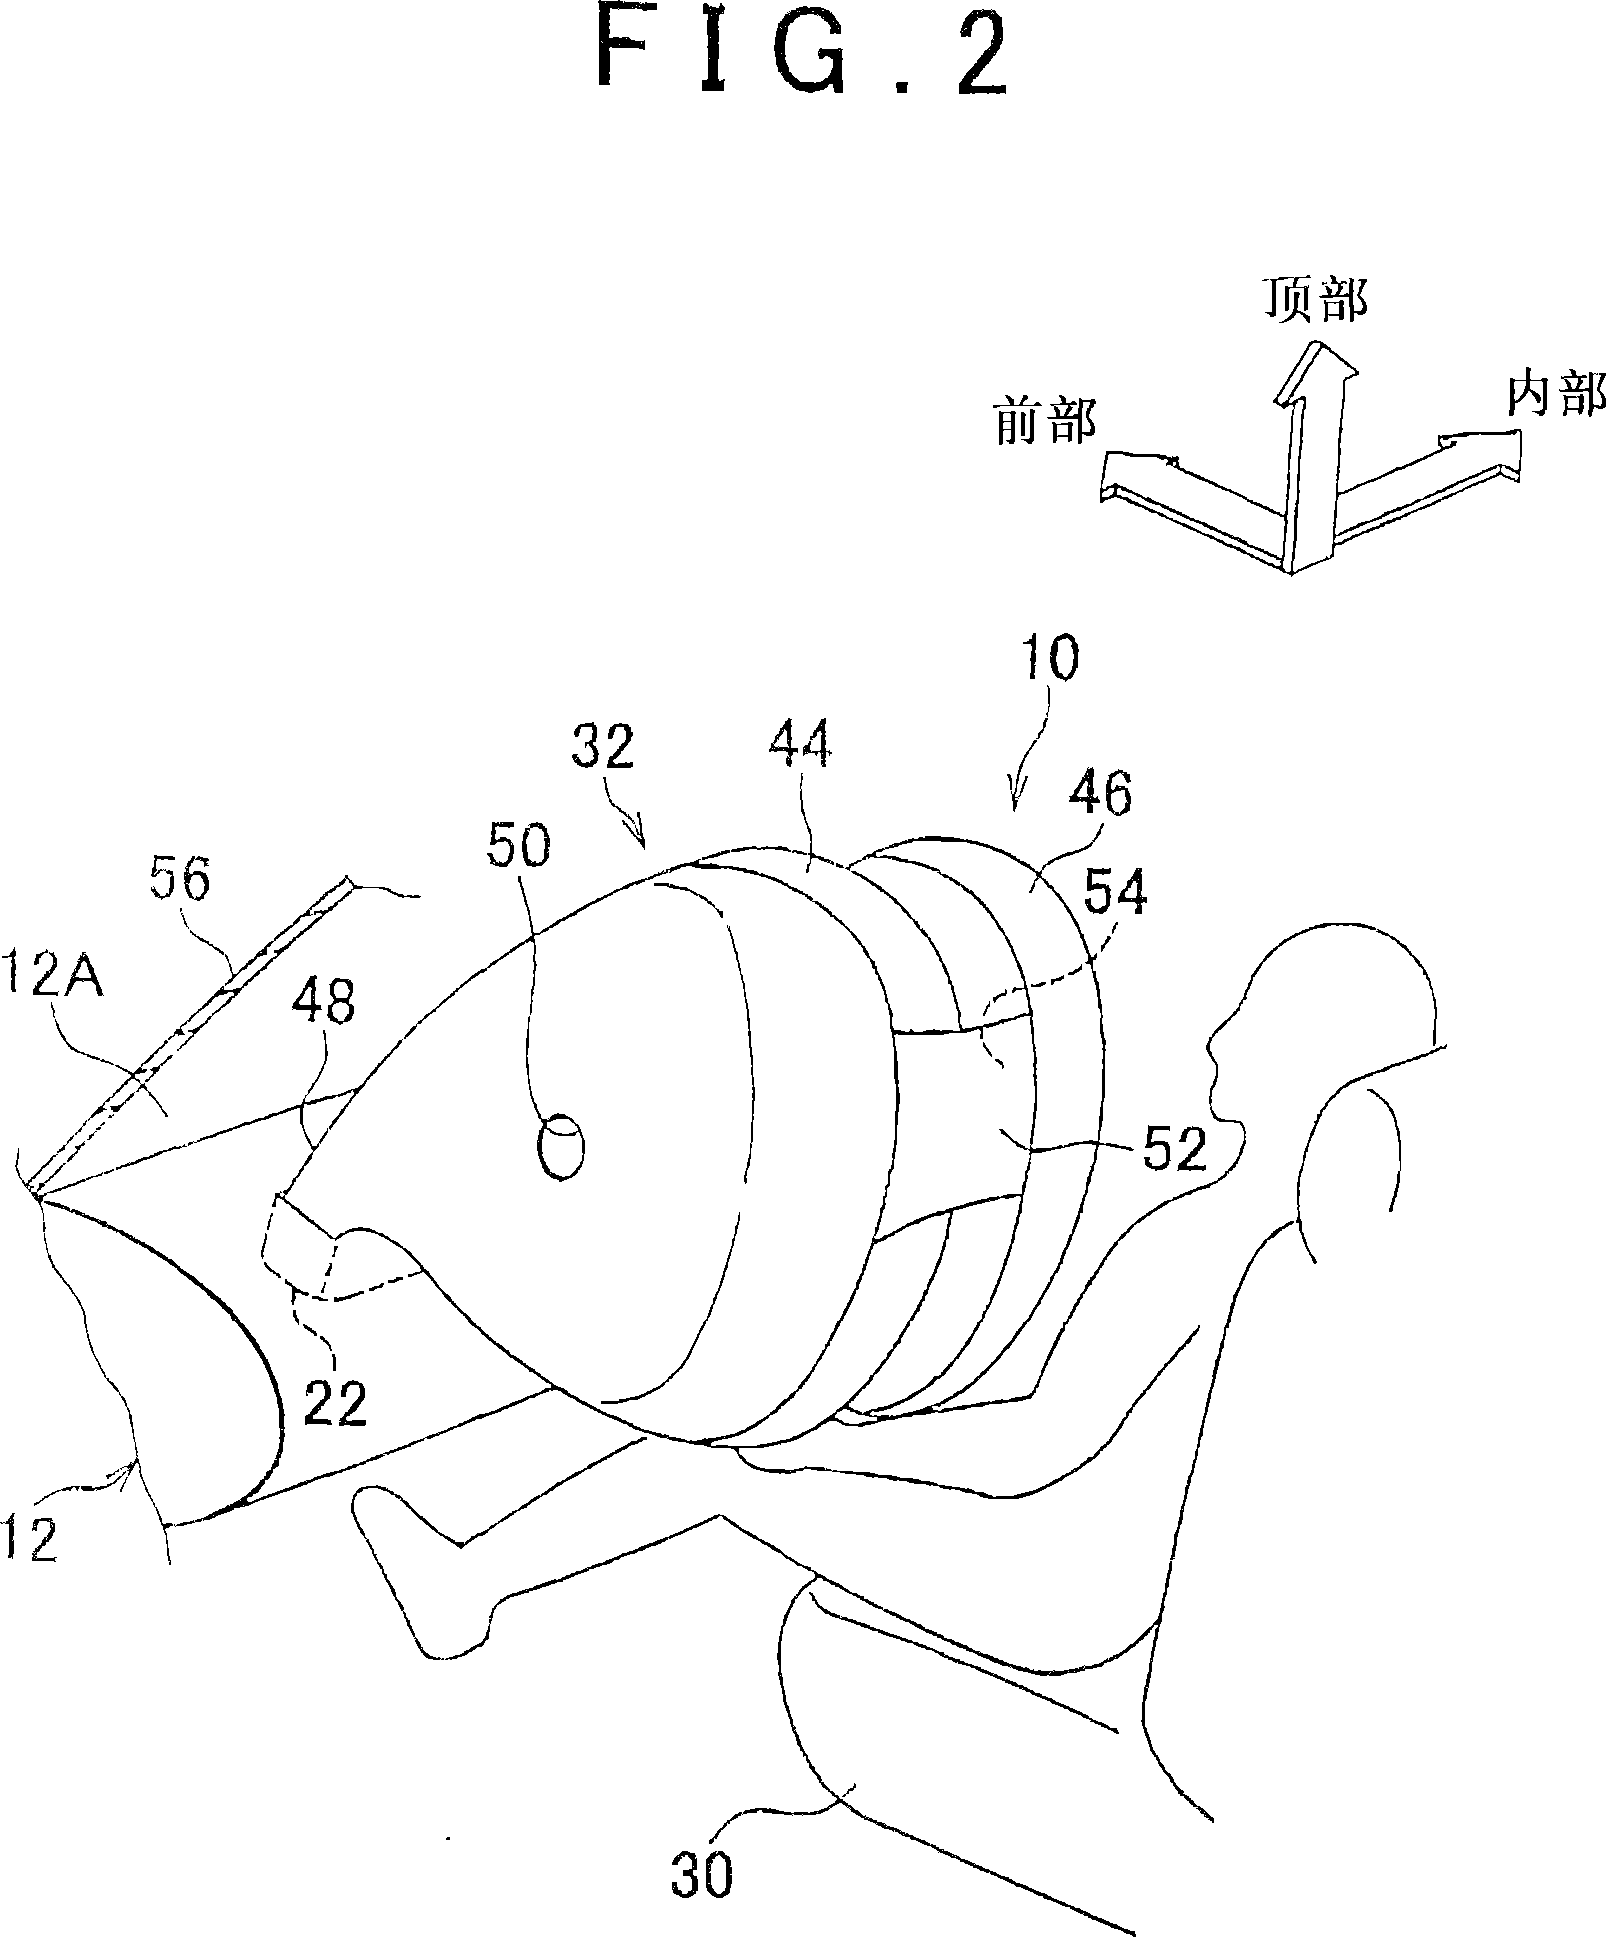 Passenger-seat safety airbag device and method of folding the same